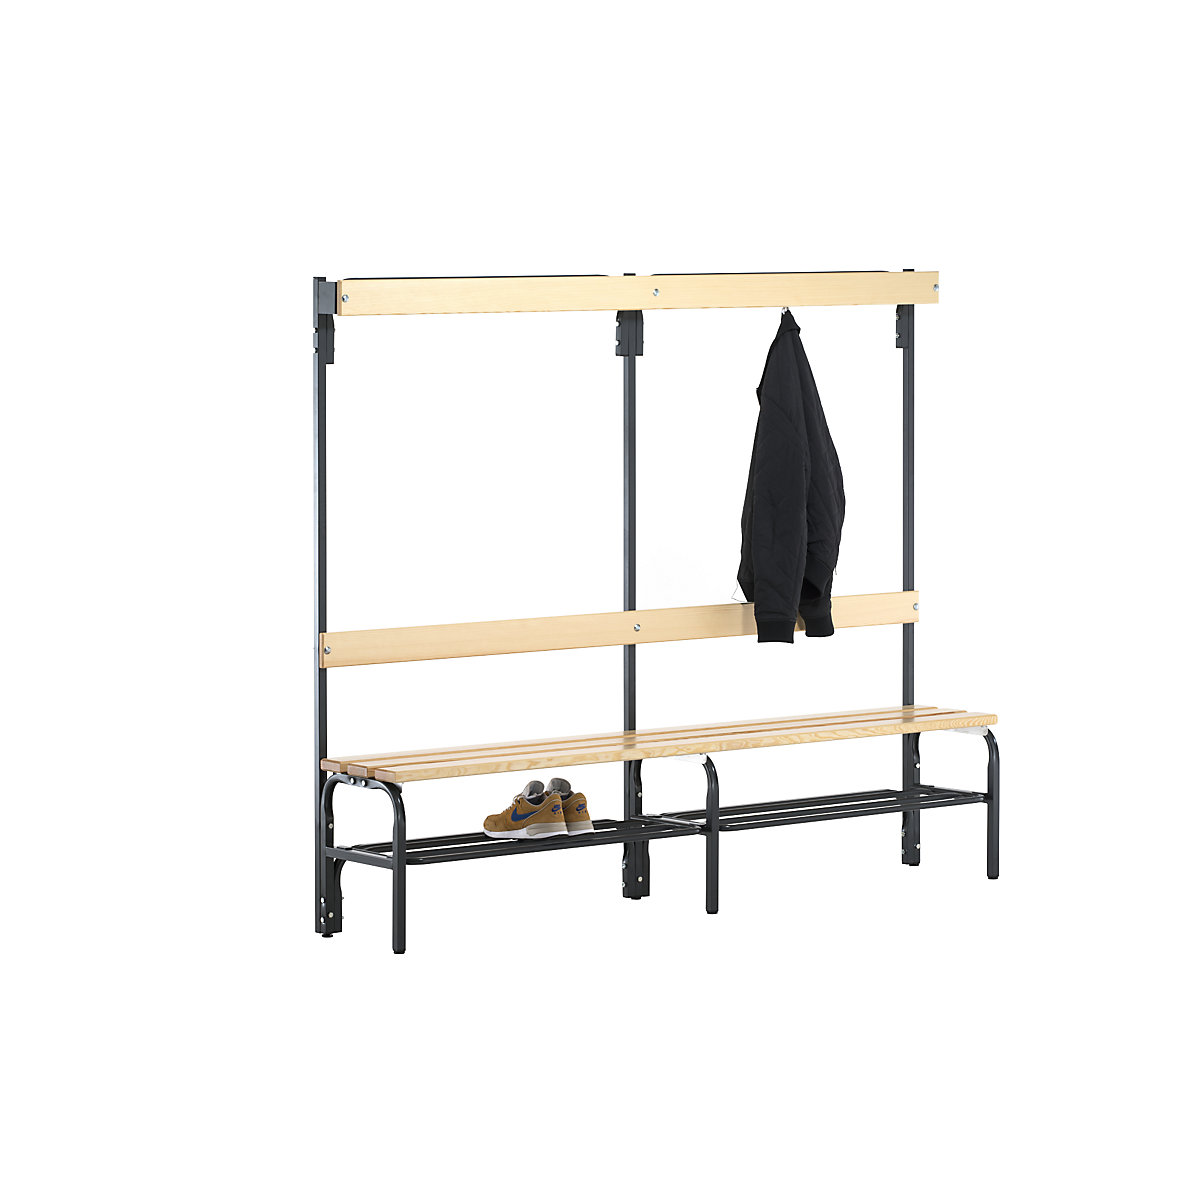 Sypro – Cloakroom bench with hook strips, single-sided, 6 hooks, 2000 mm, charcoal, shoe rack